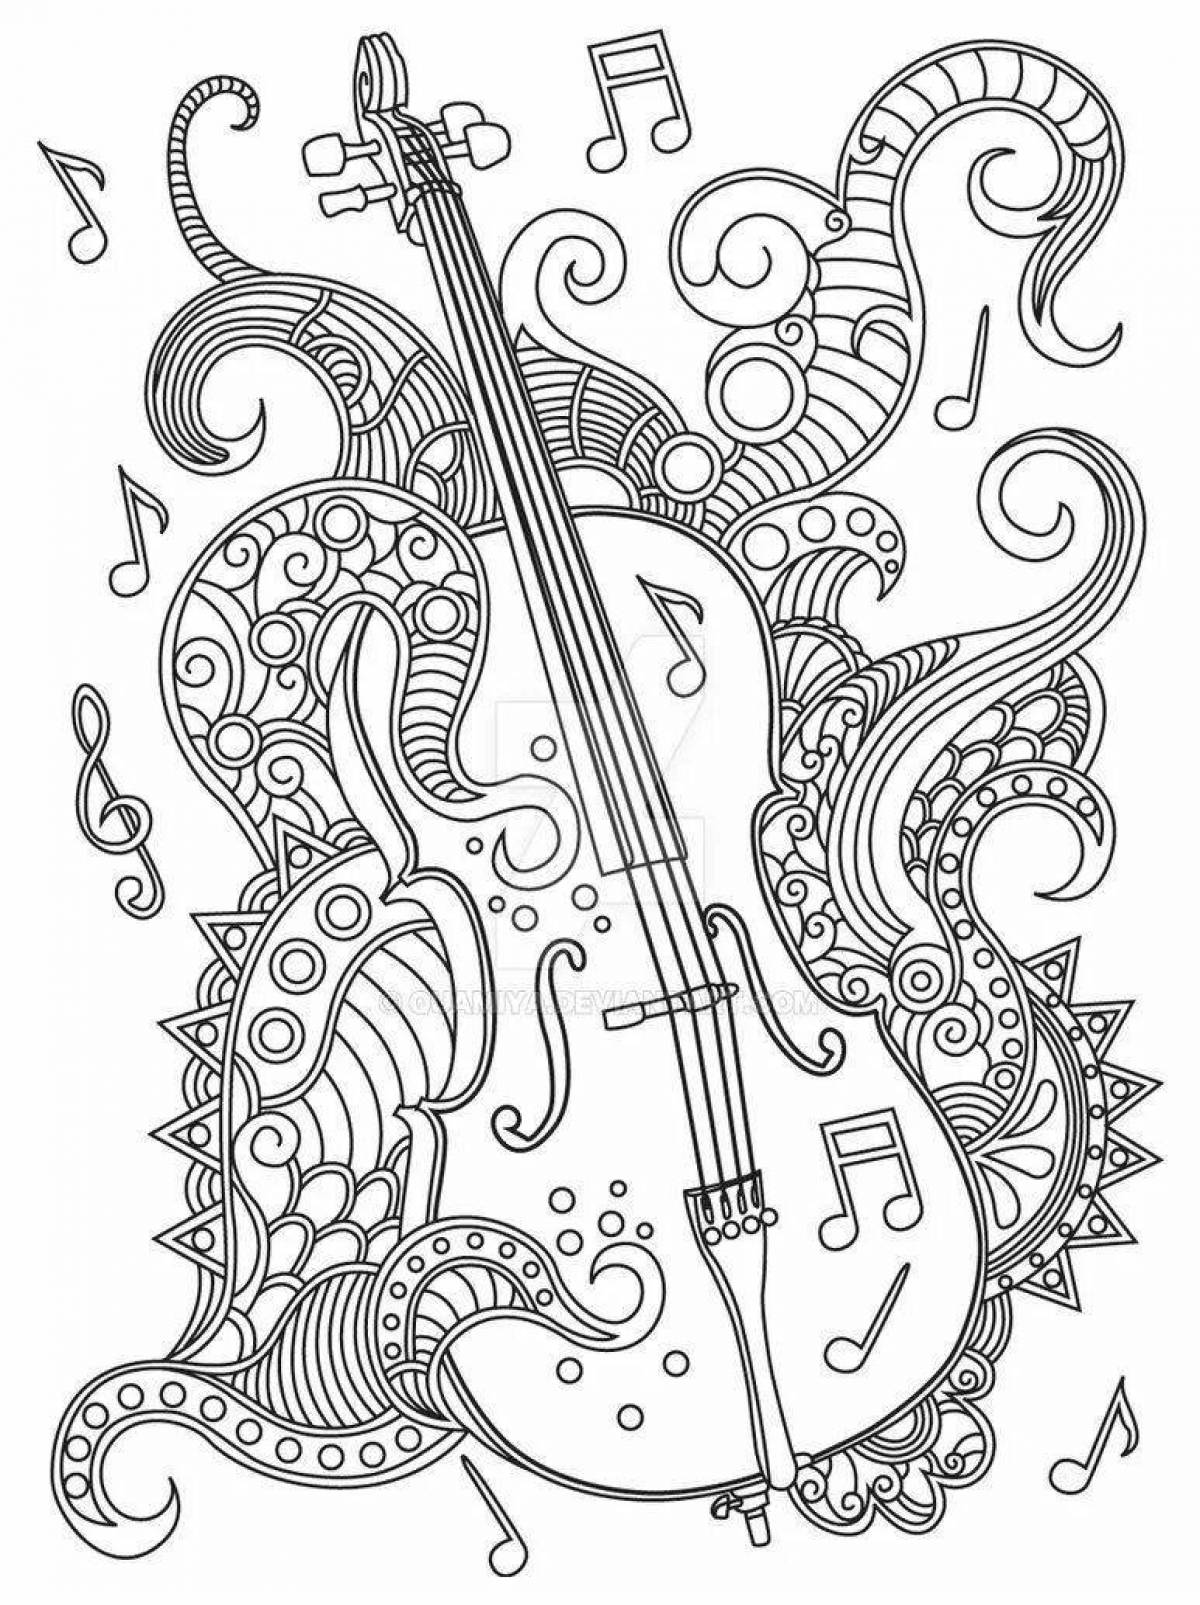 A fun musical coloring book for kids